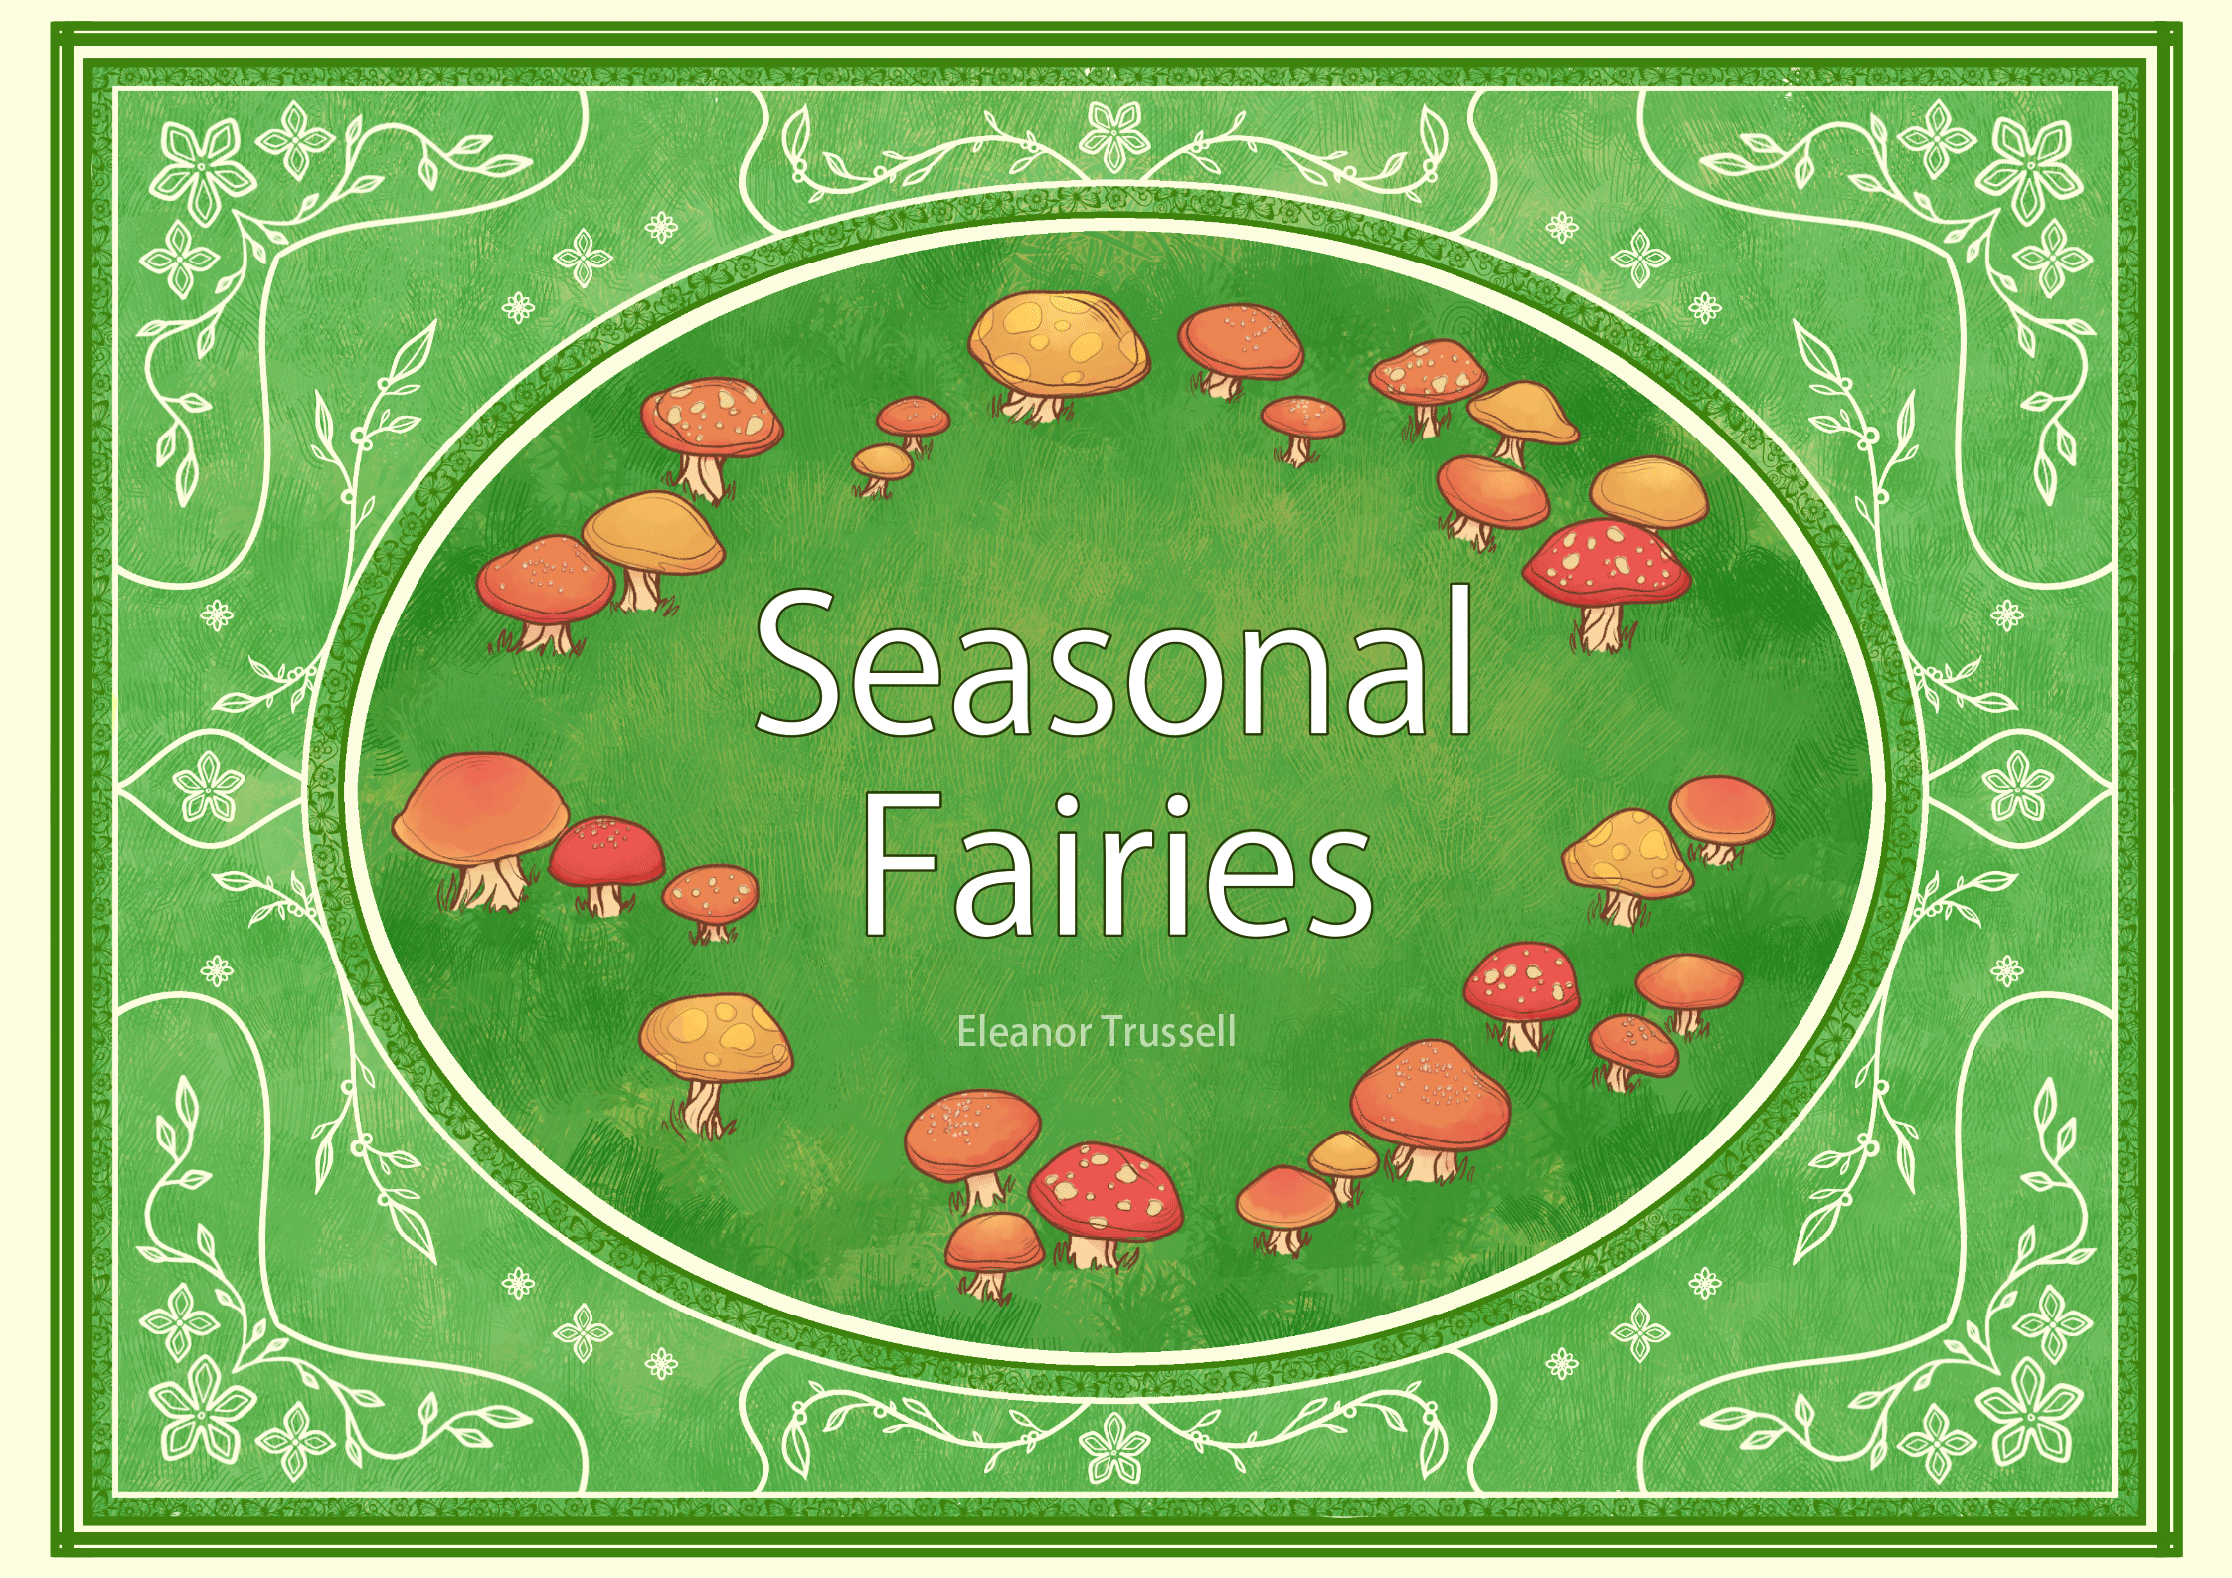 Publication cover artwork featuring illustrated mushrooms and the title Seasonal Fairies